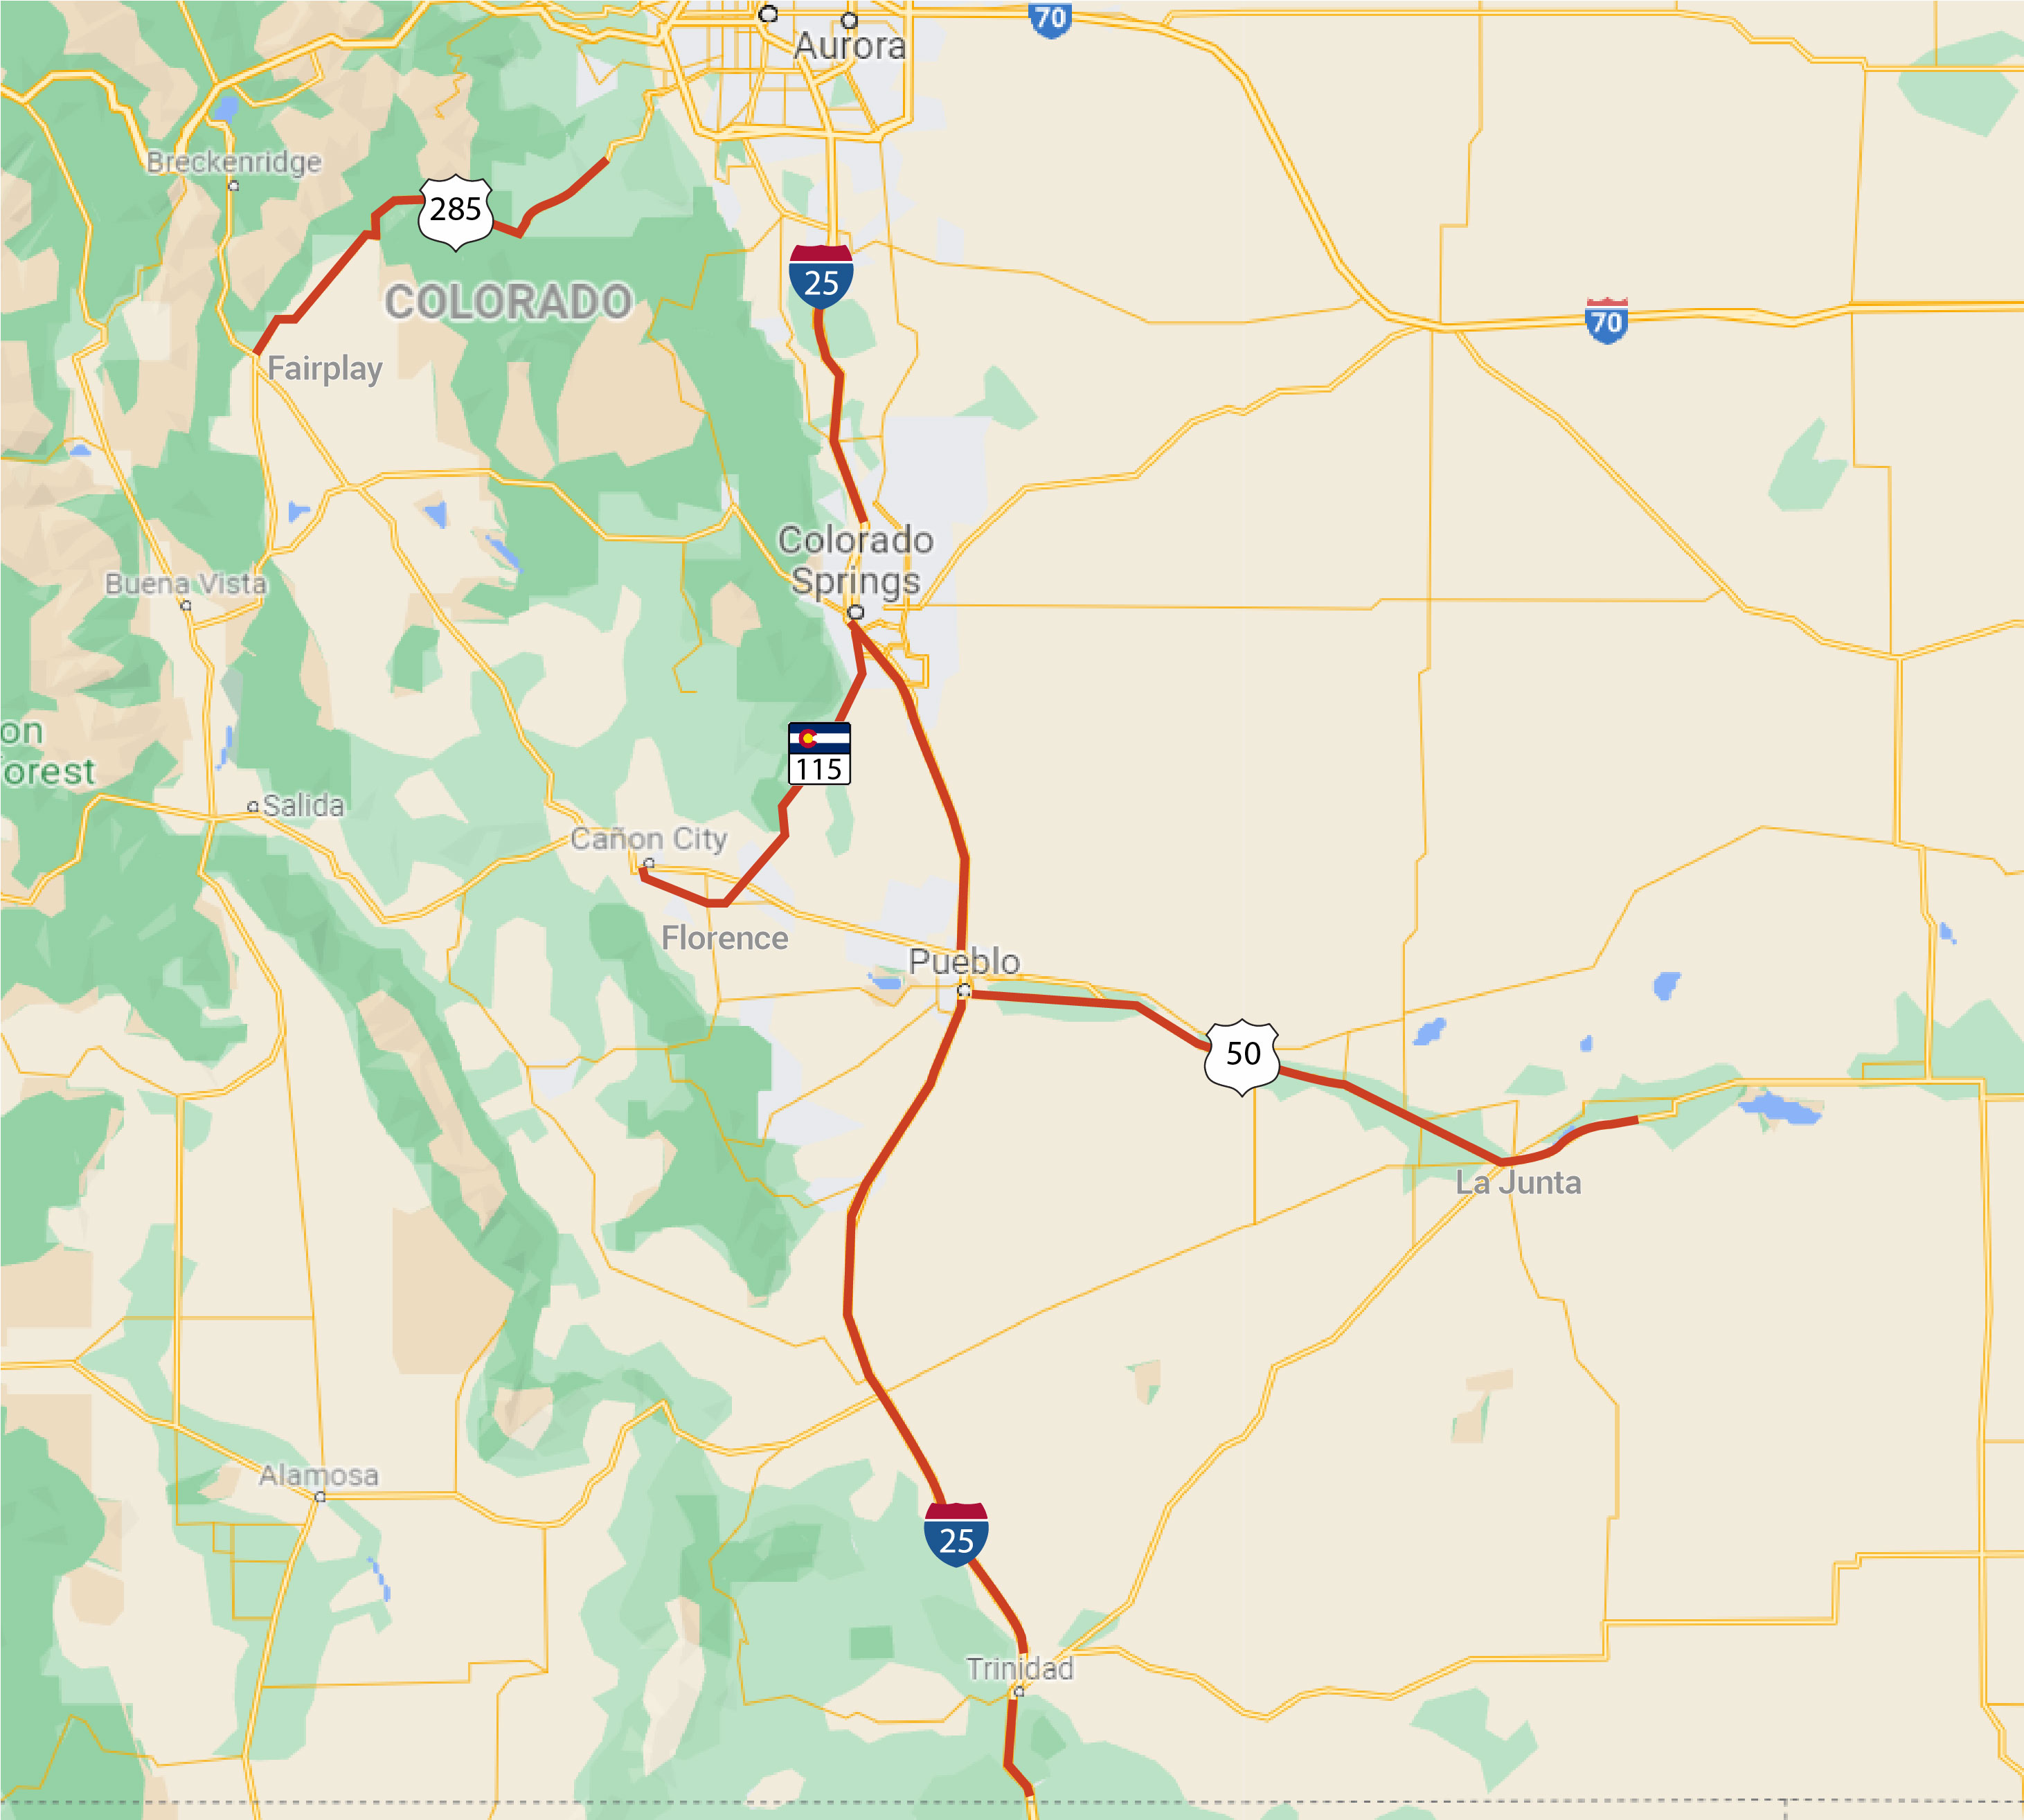 Southeastern Colorado Striping project map detail image